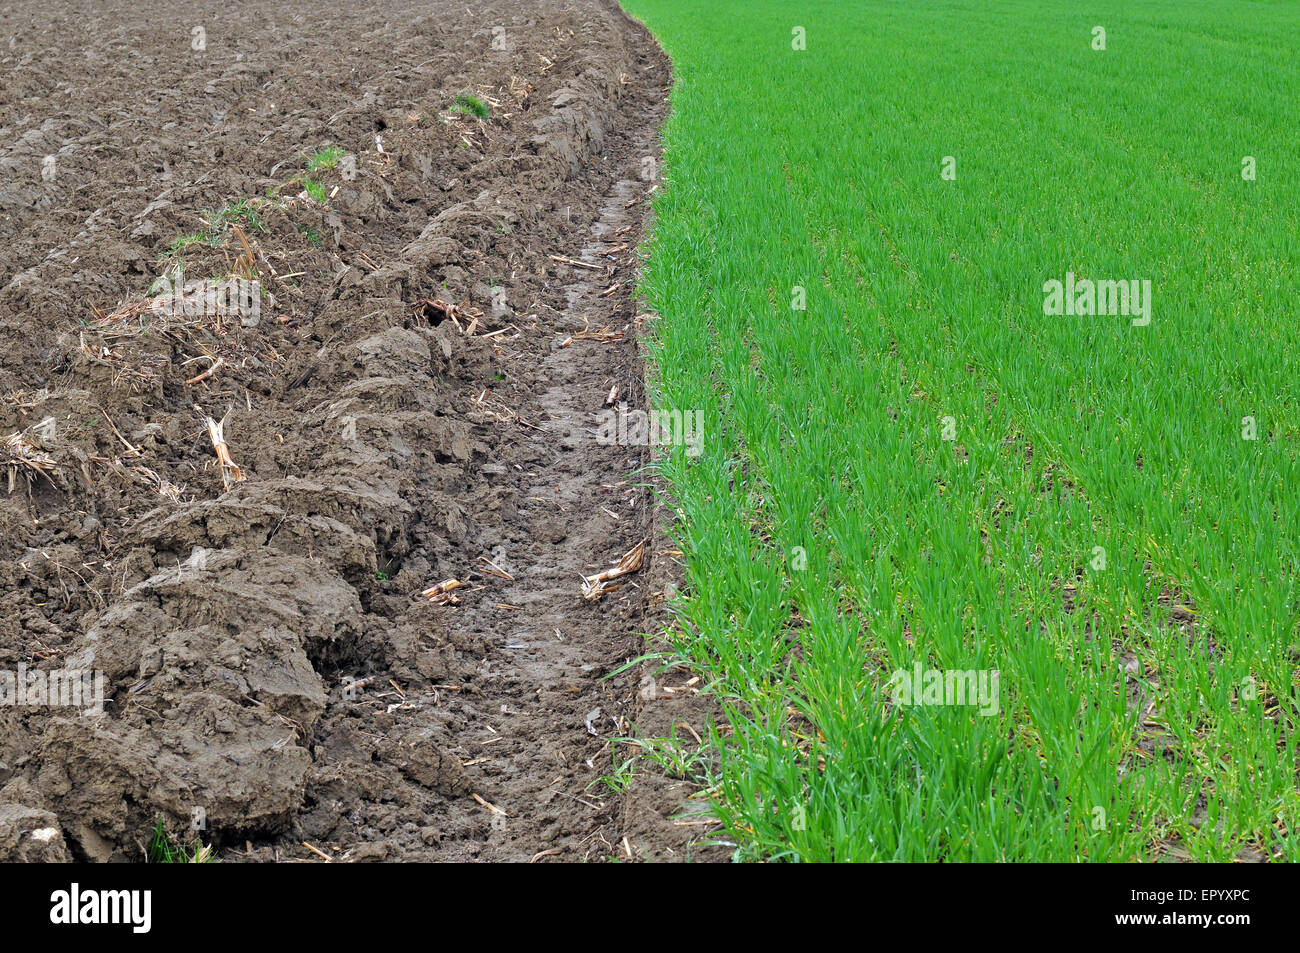 Plowed land and field of wheat Stock Photo